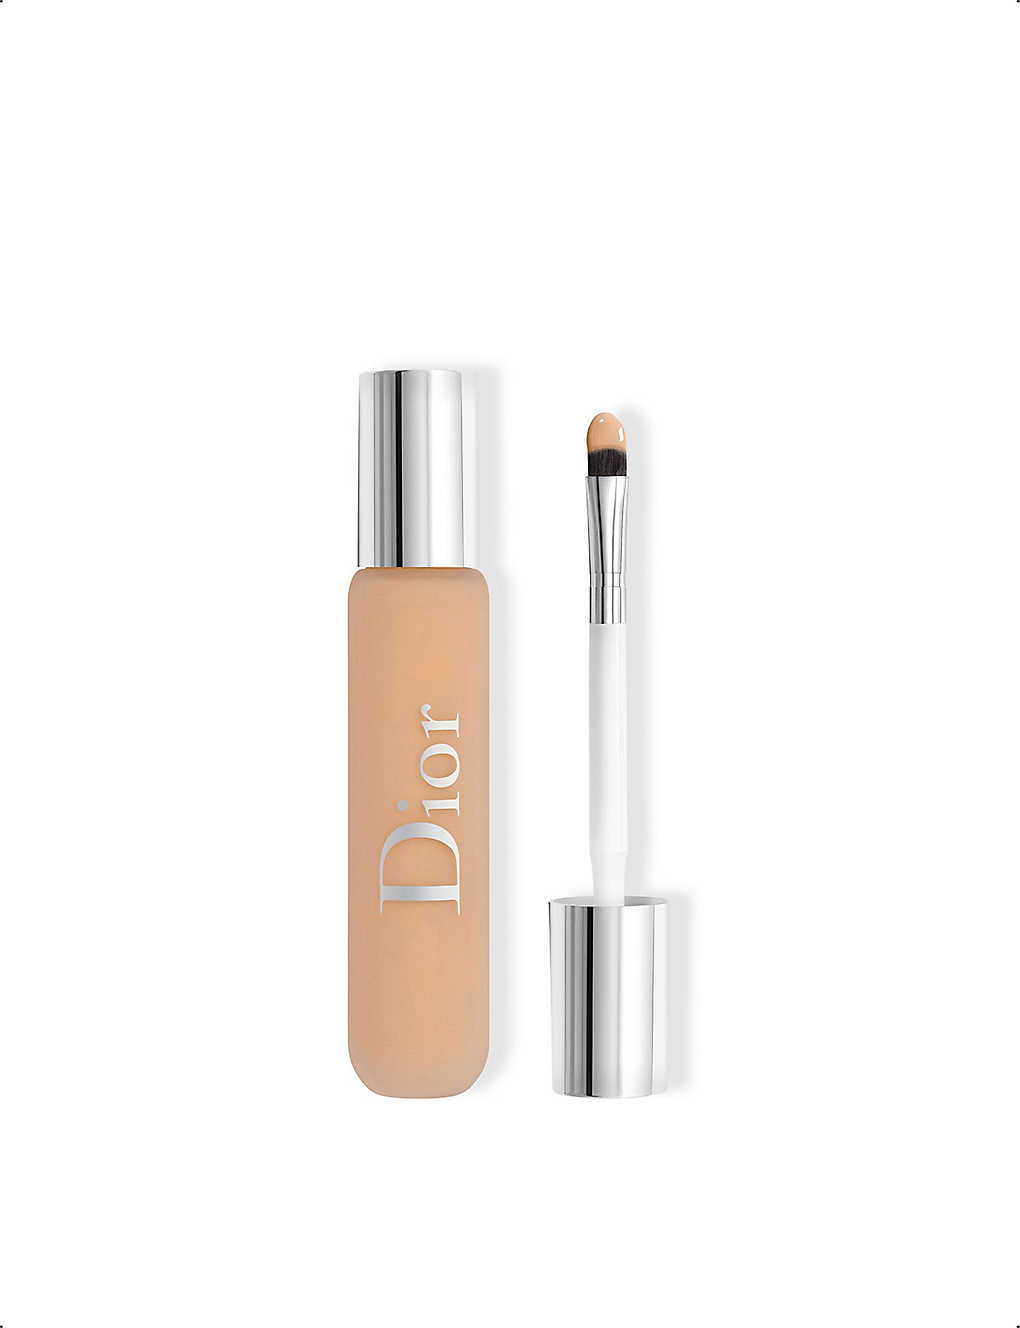 Dior 3n Backstage Face & Body Flash Perfector Concealer 11ml